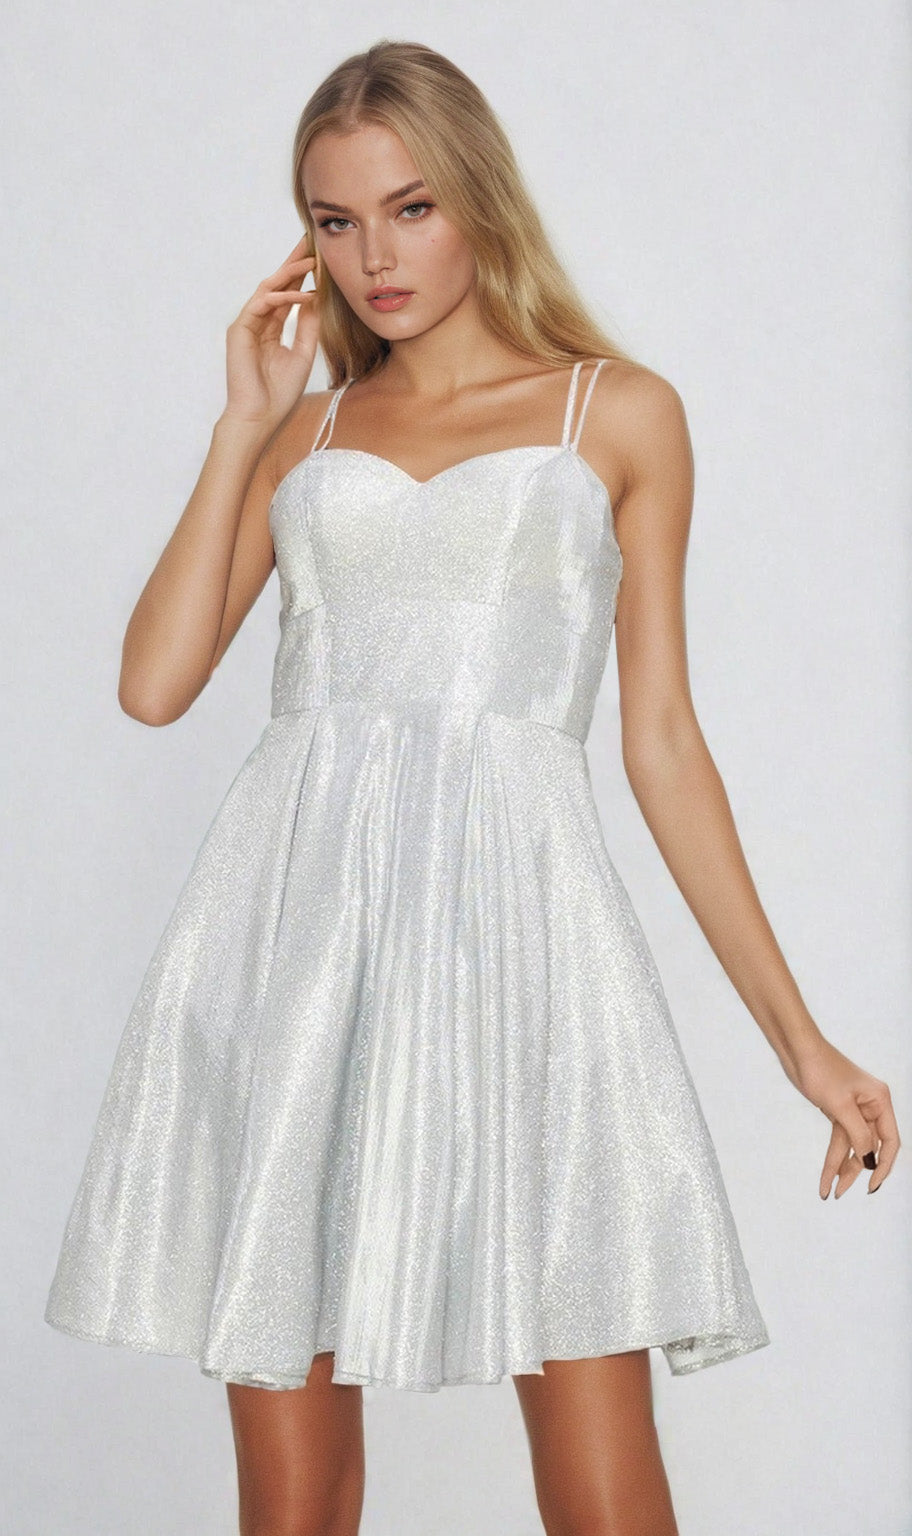 Cinderella Couture 8011J Short A-Line Homecoming Dress